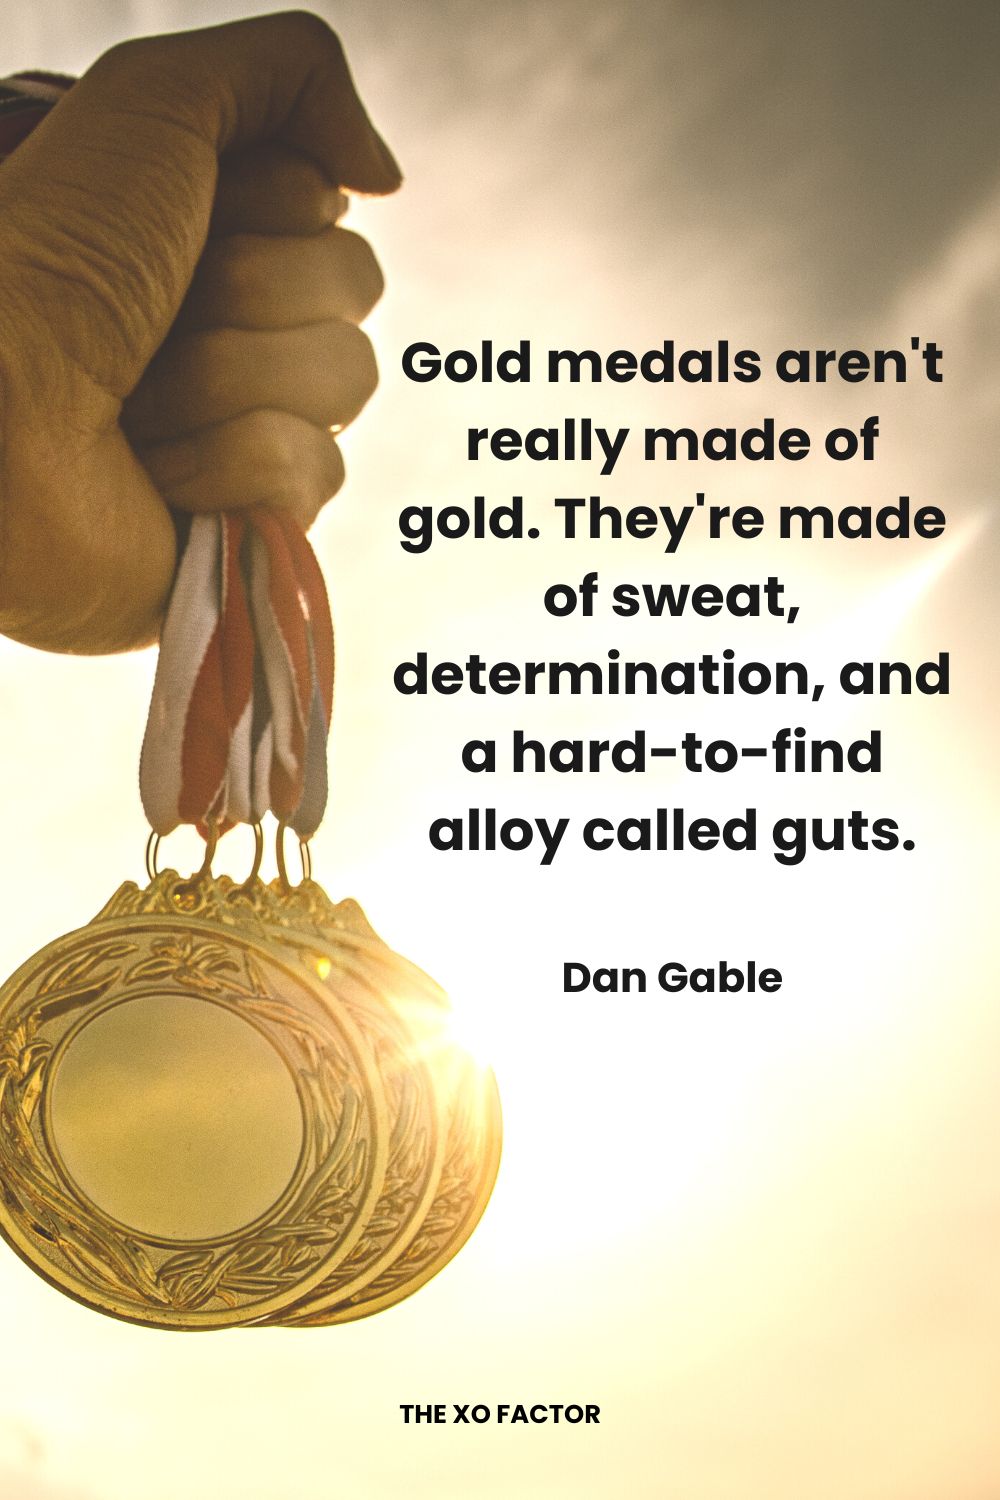 Gold medals aren't really made of gold. They're made of sweat, determination, and a hard-to-find alloy called guts. Dan Gable